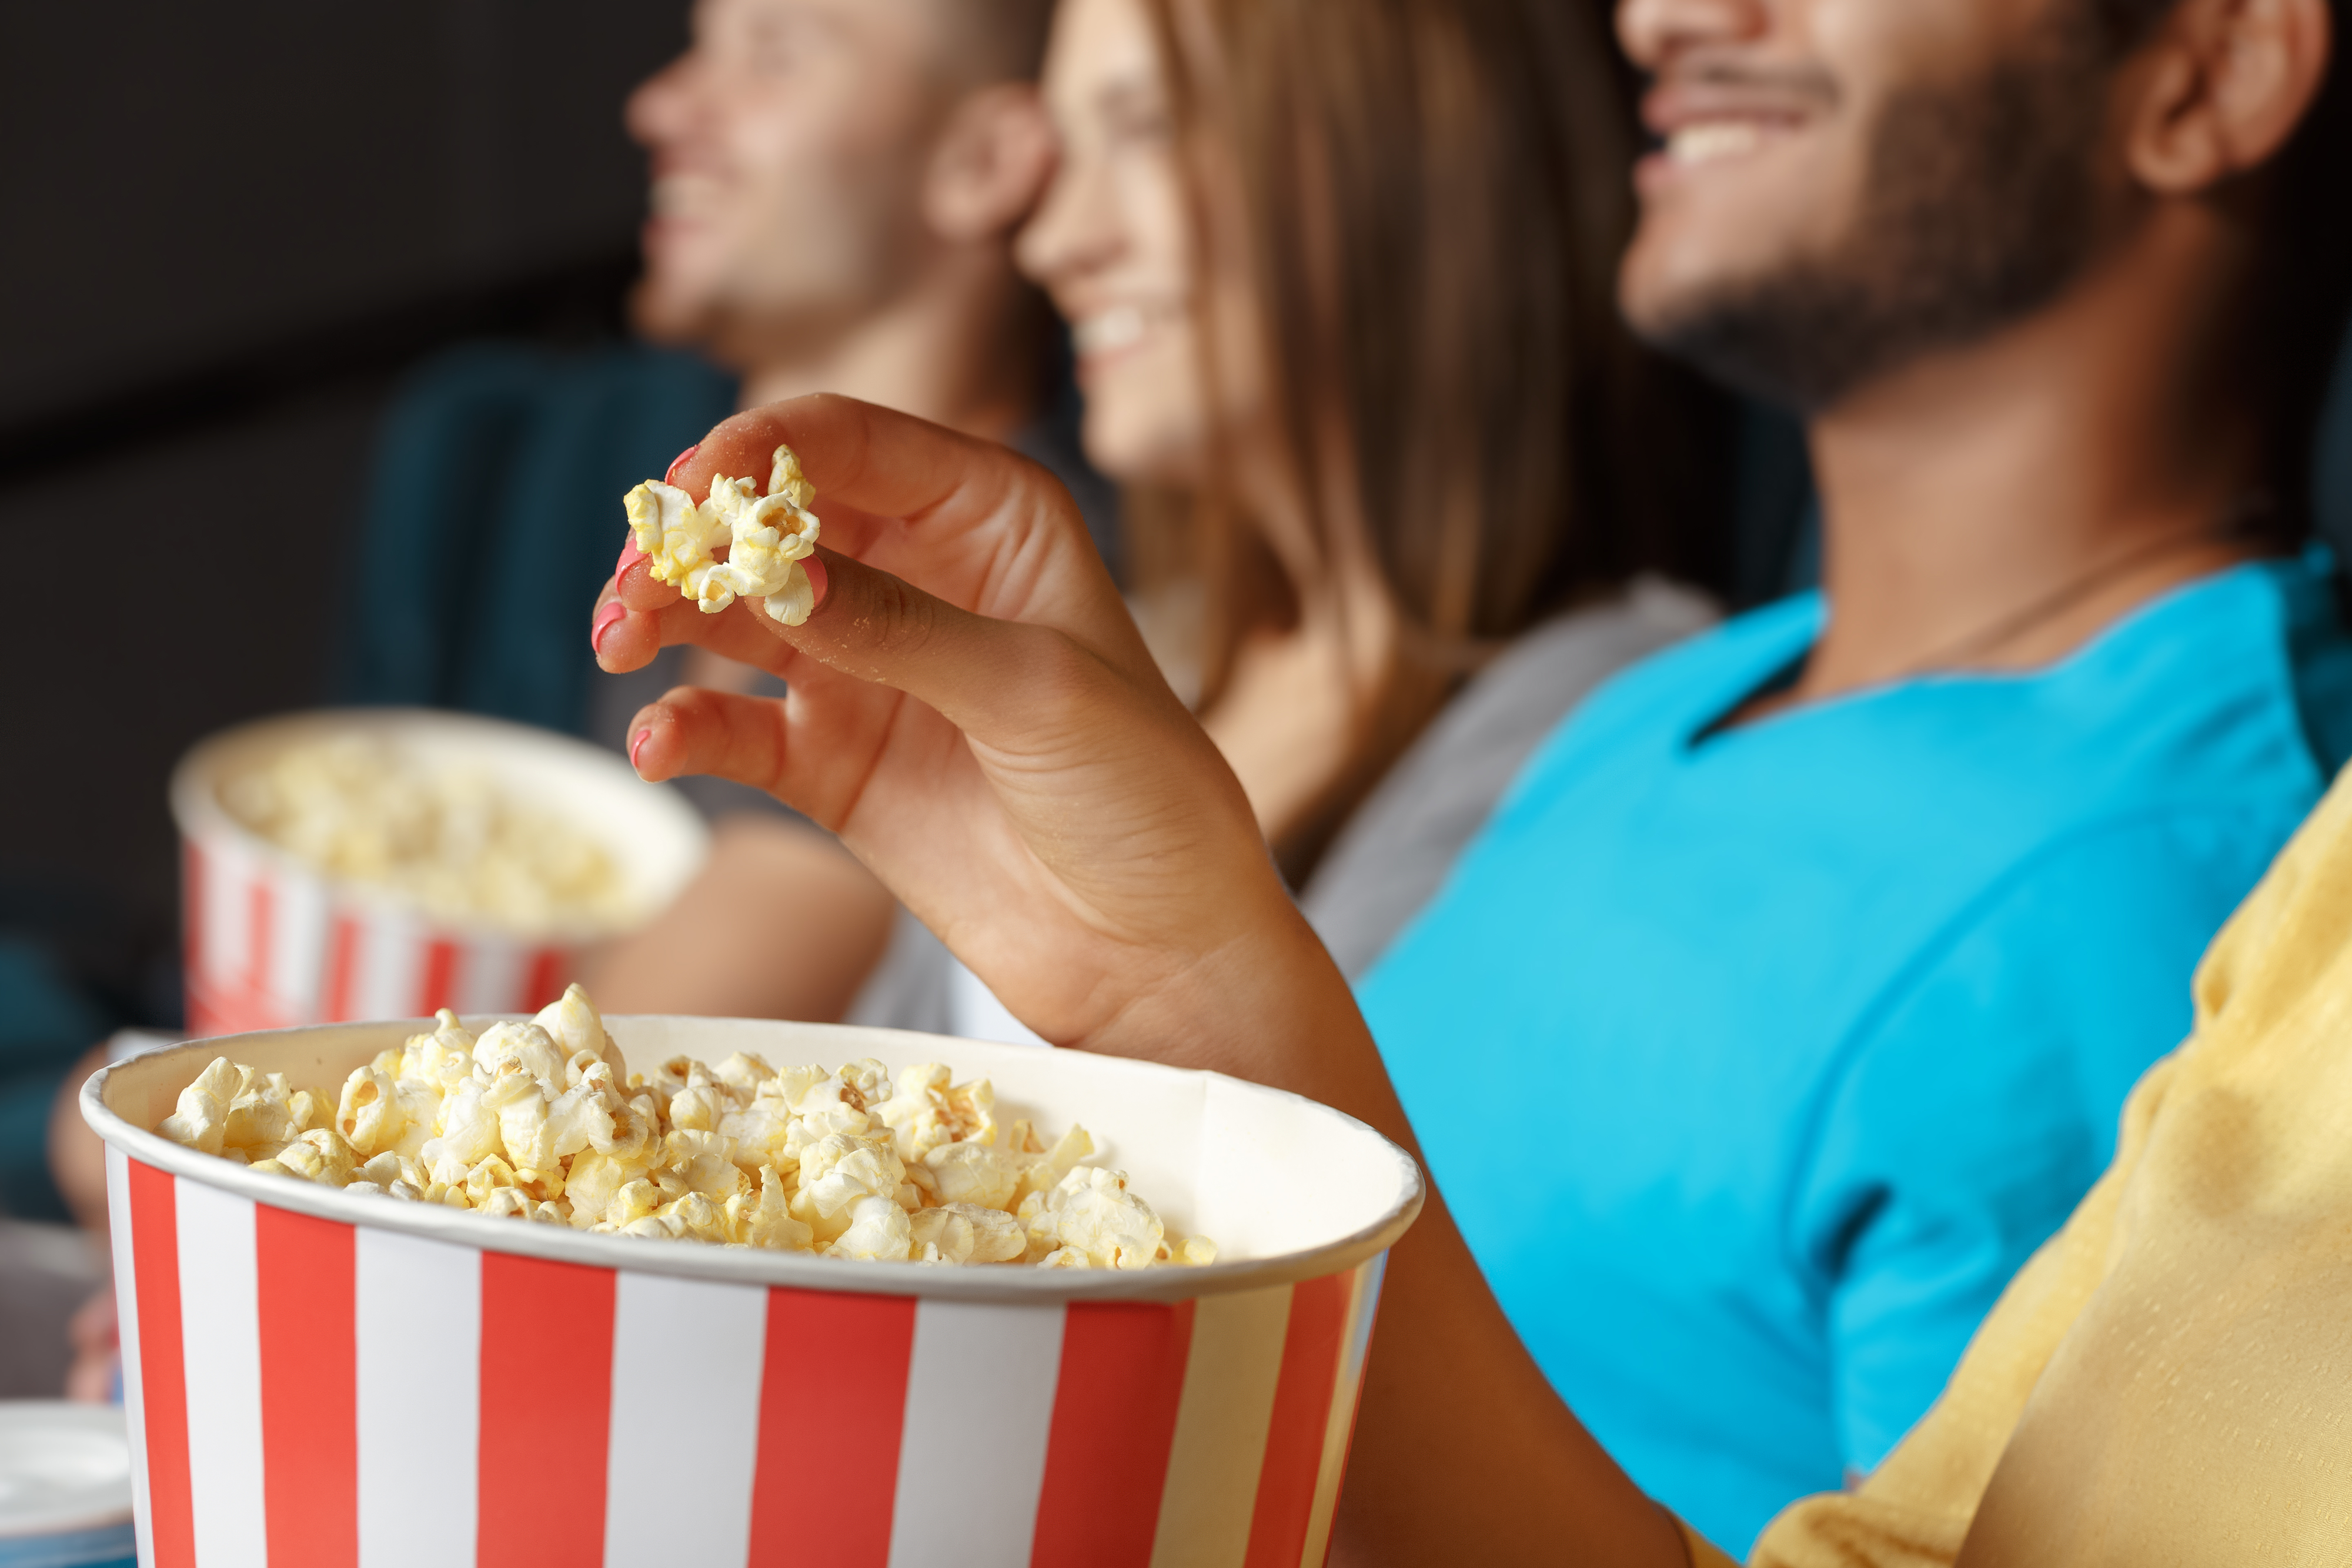 People are in a theater, smiling and eating popcorn. The fingers of a person are holding a piece of popcorn above a large popcorn container